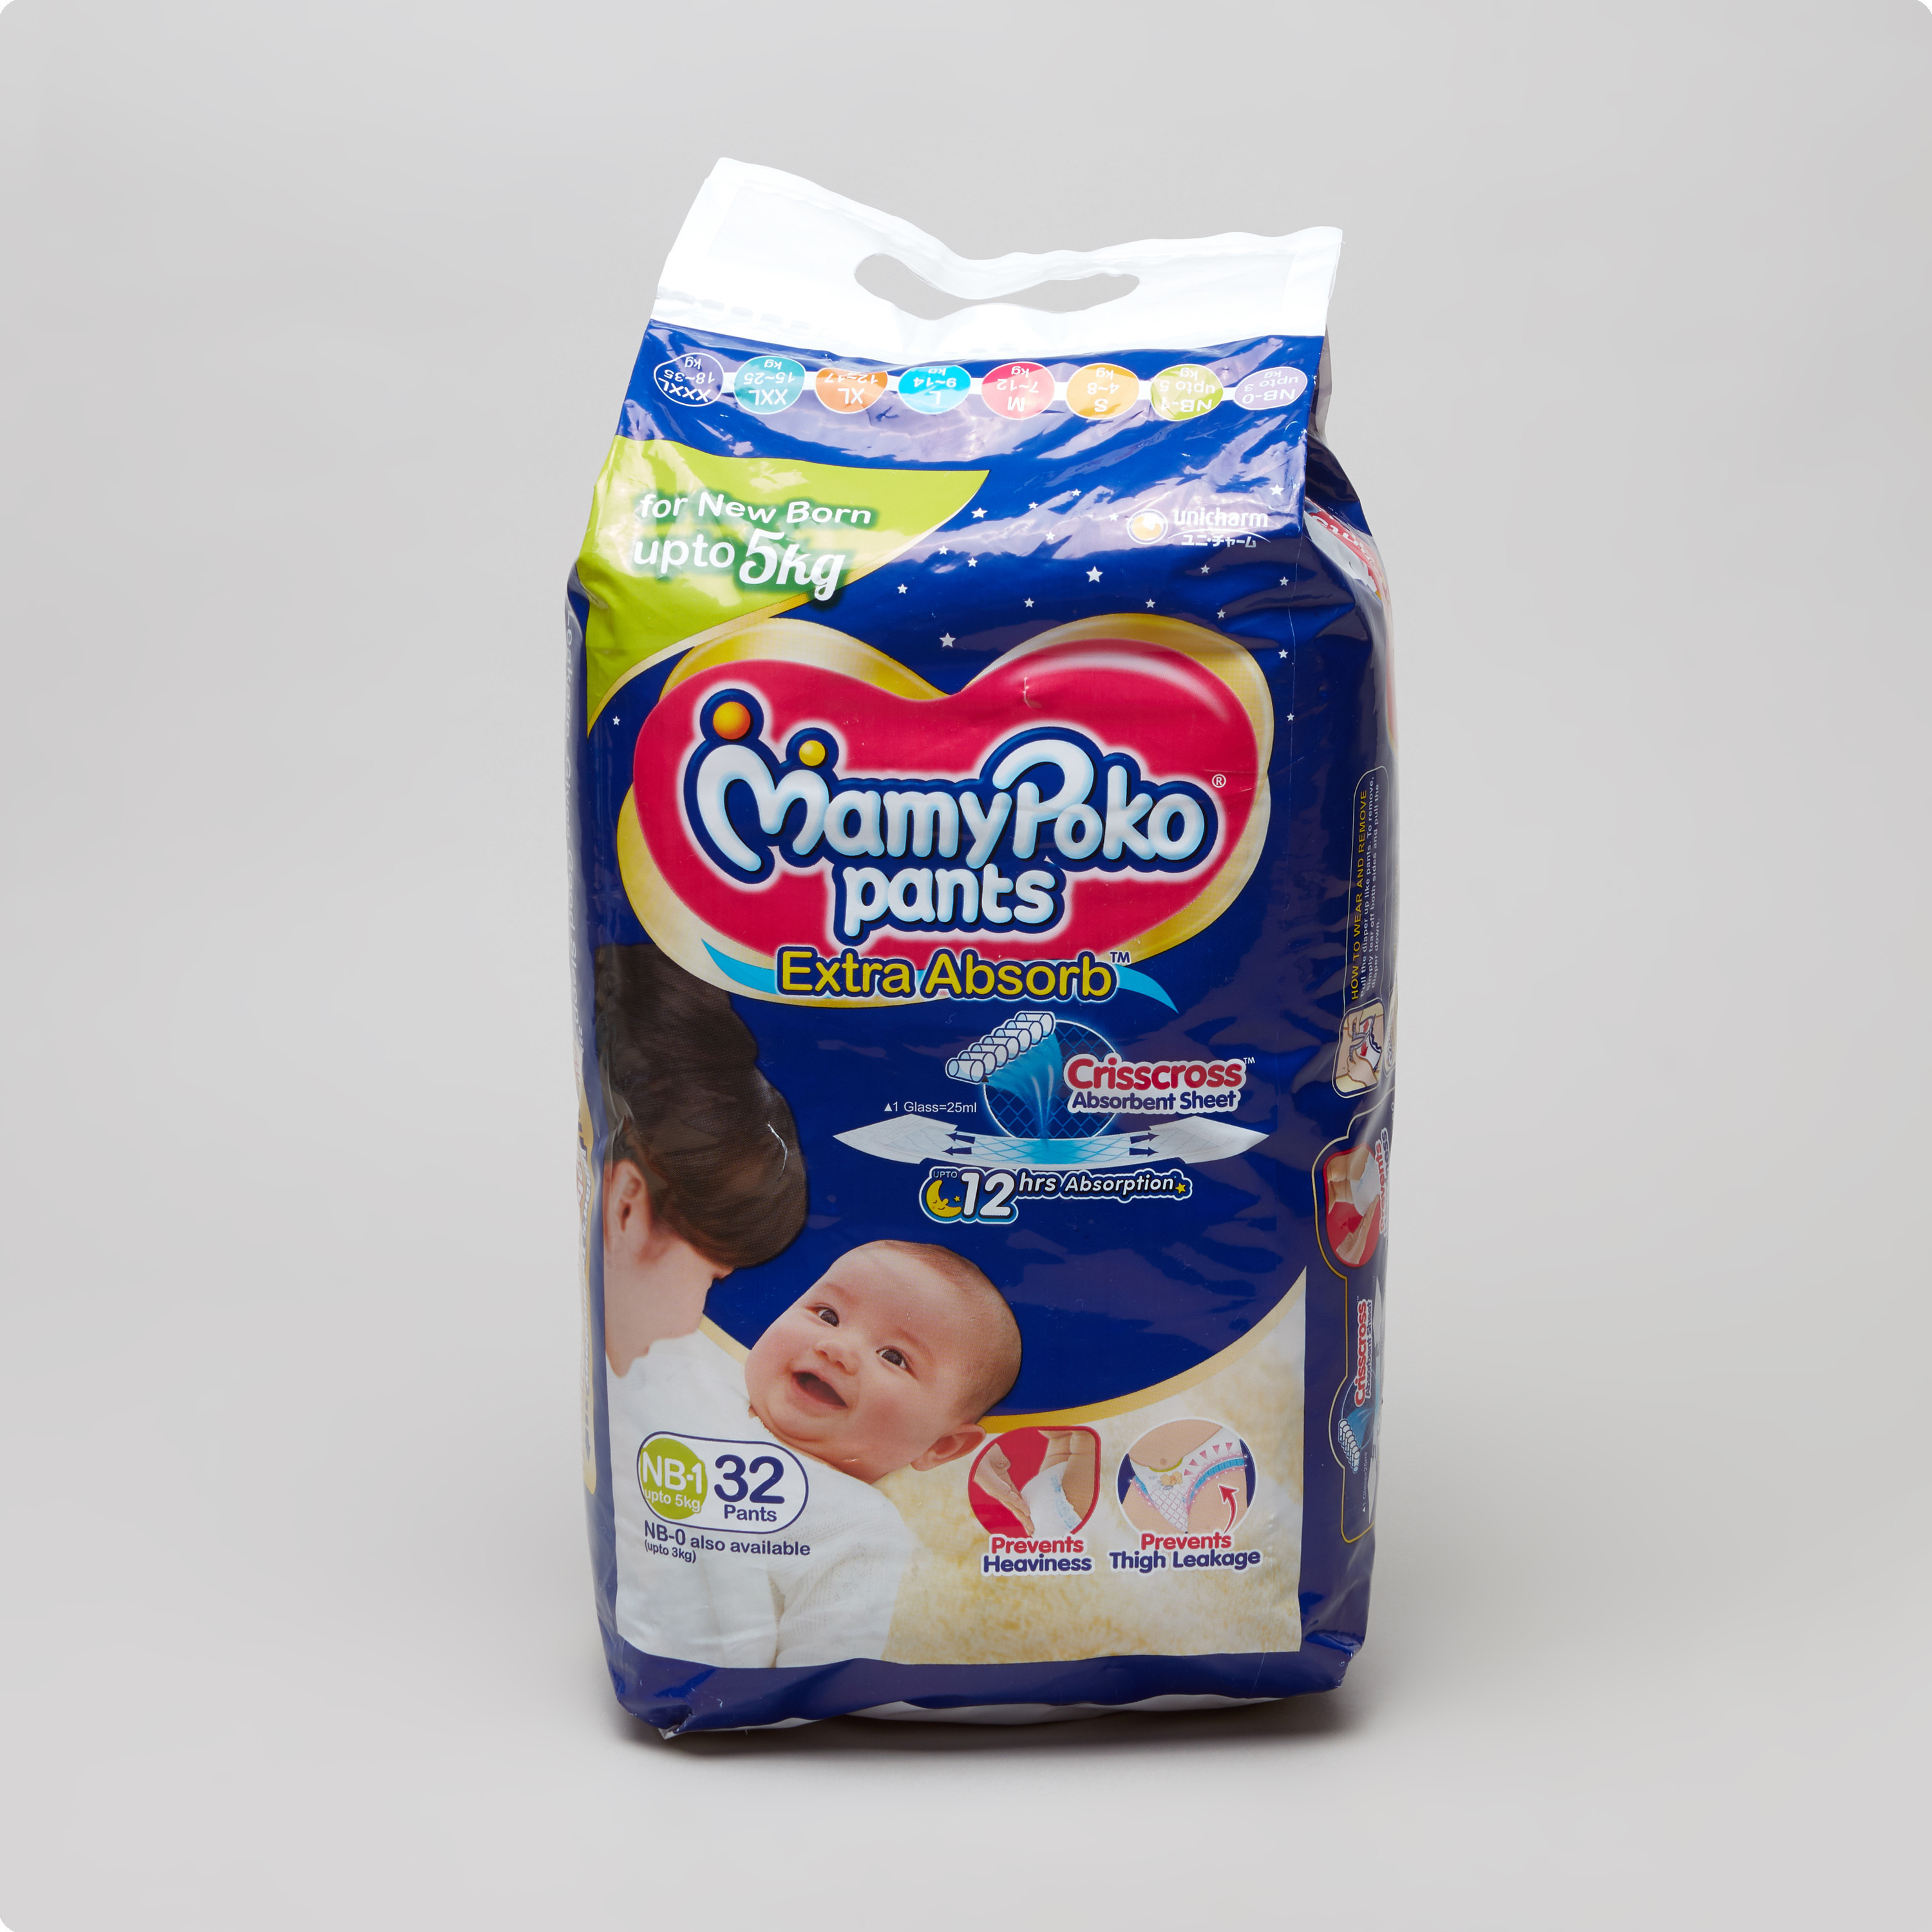 Buy Mamypoko pants L36 Online at Low Prices in India - Amazon.in